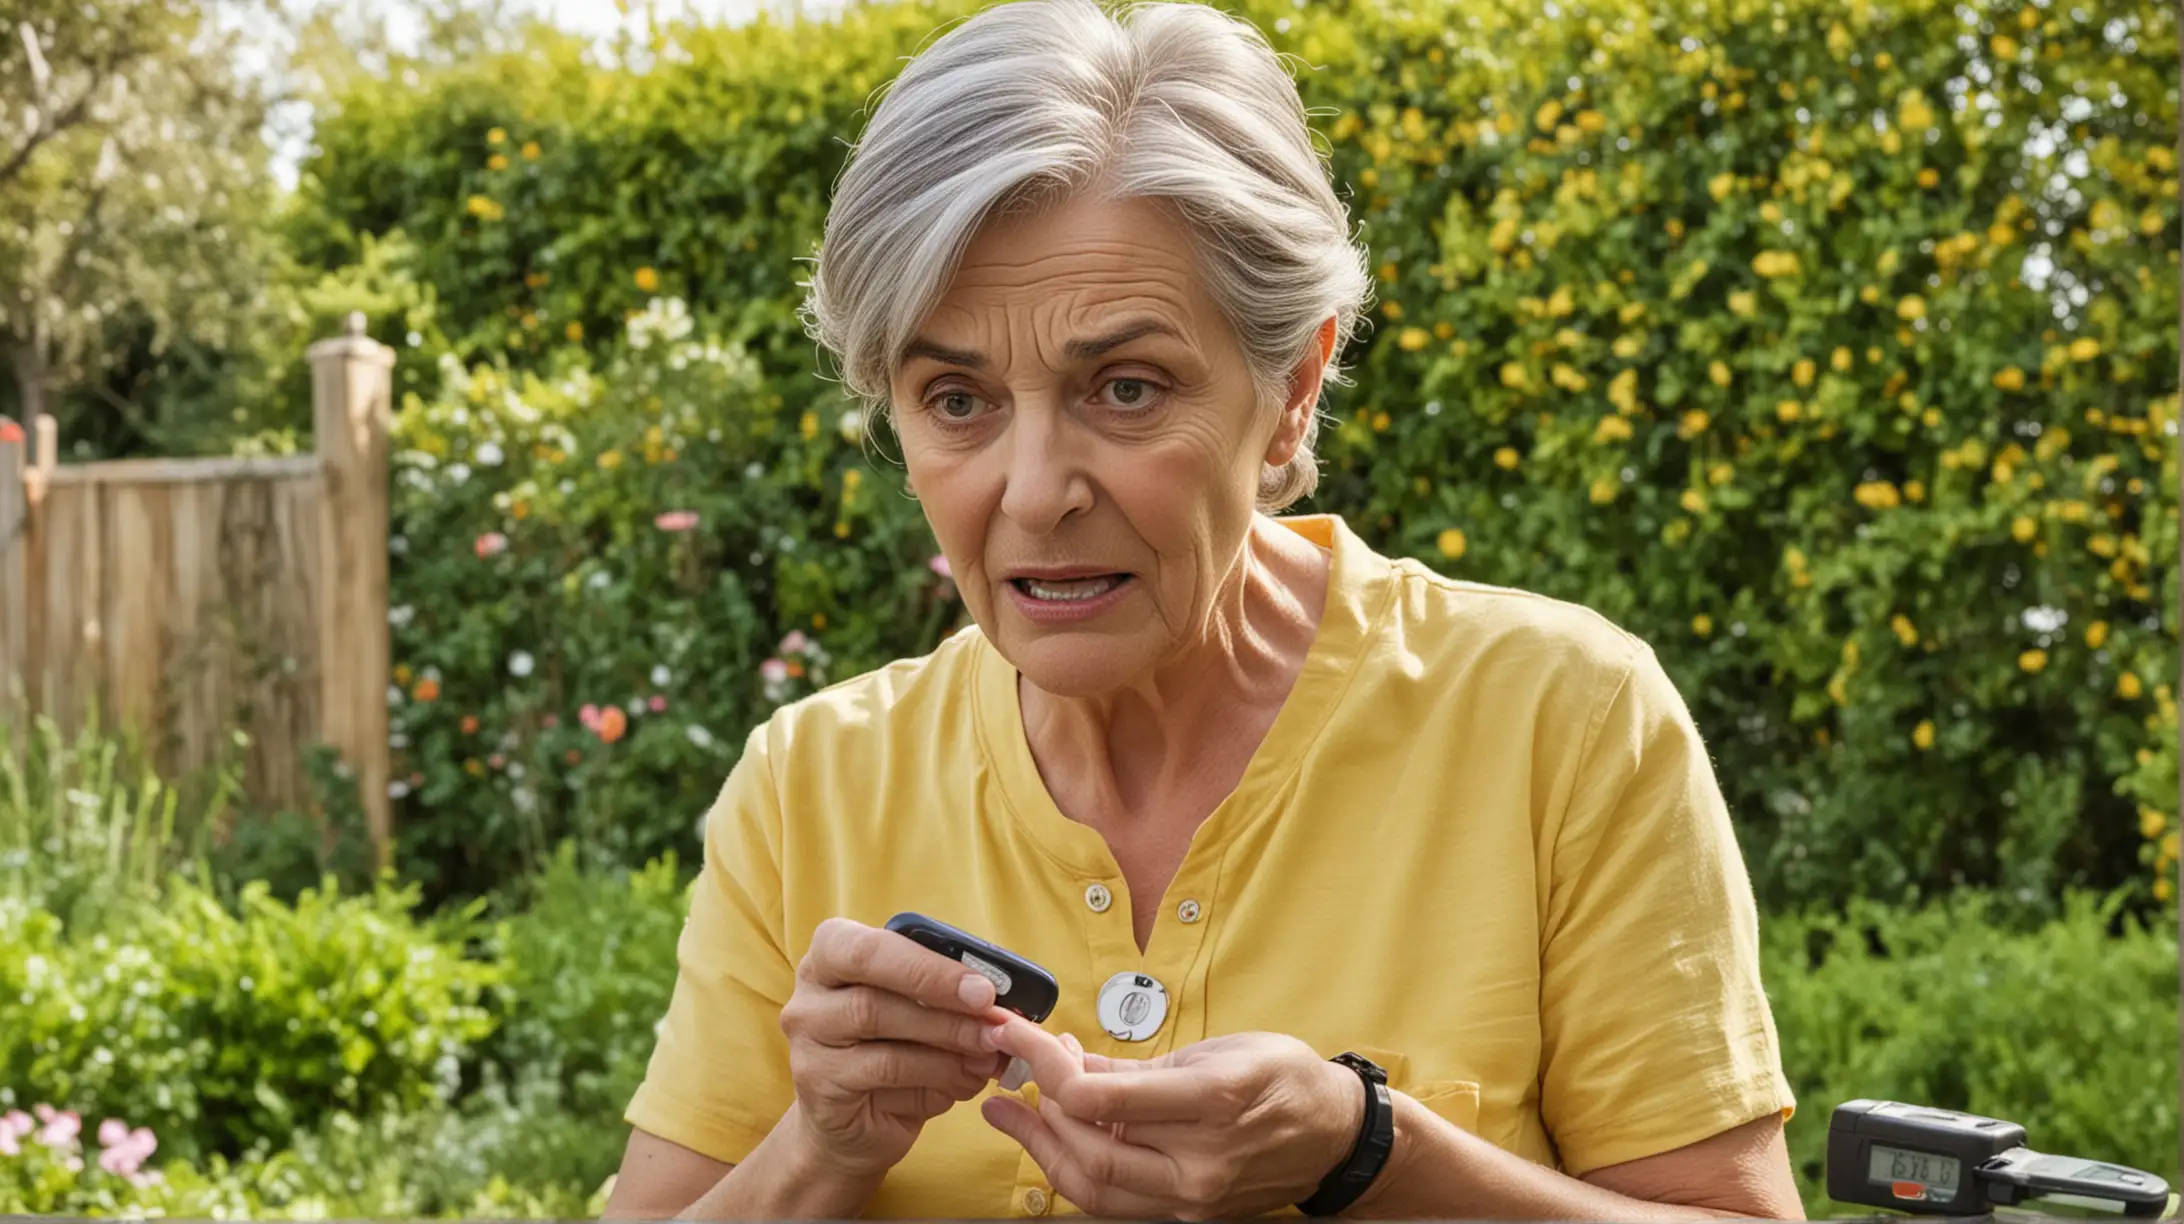 a good looking older woman scared looking at a blood glucose meter with yellow shirt with a garden in the background

